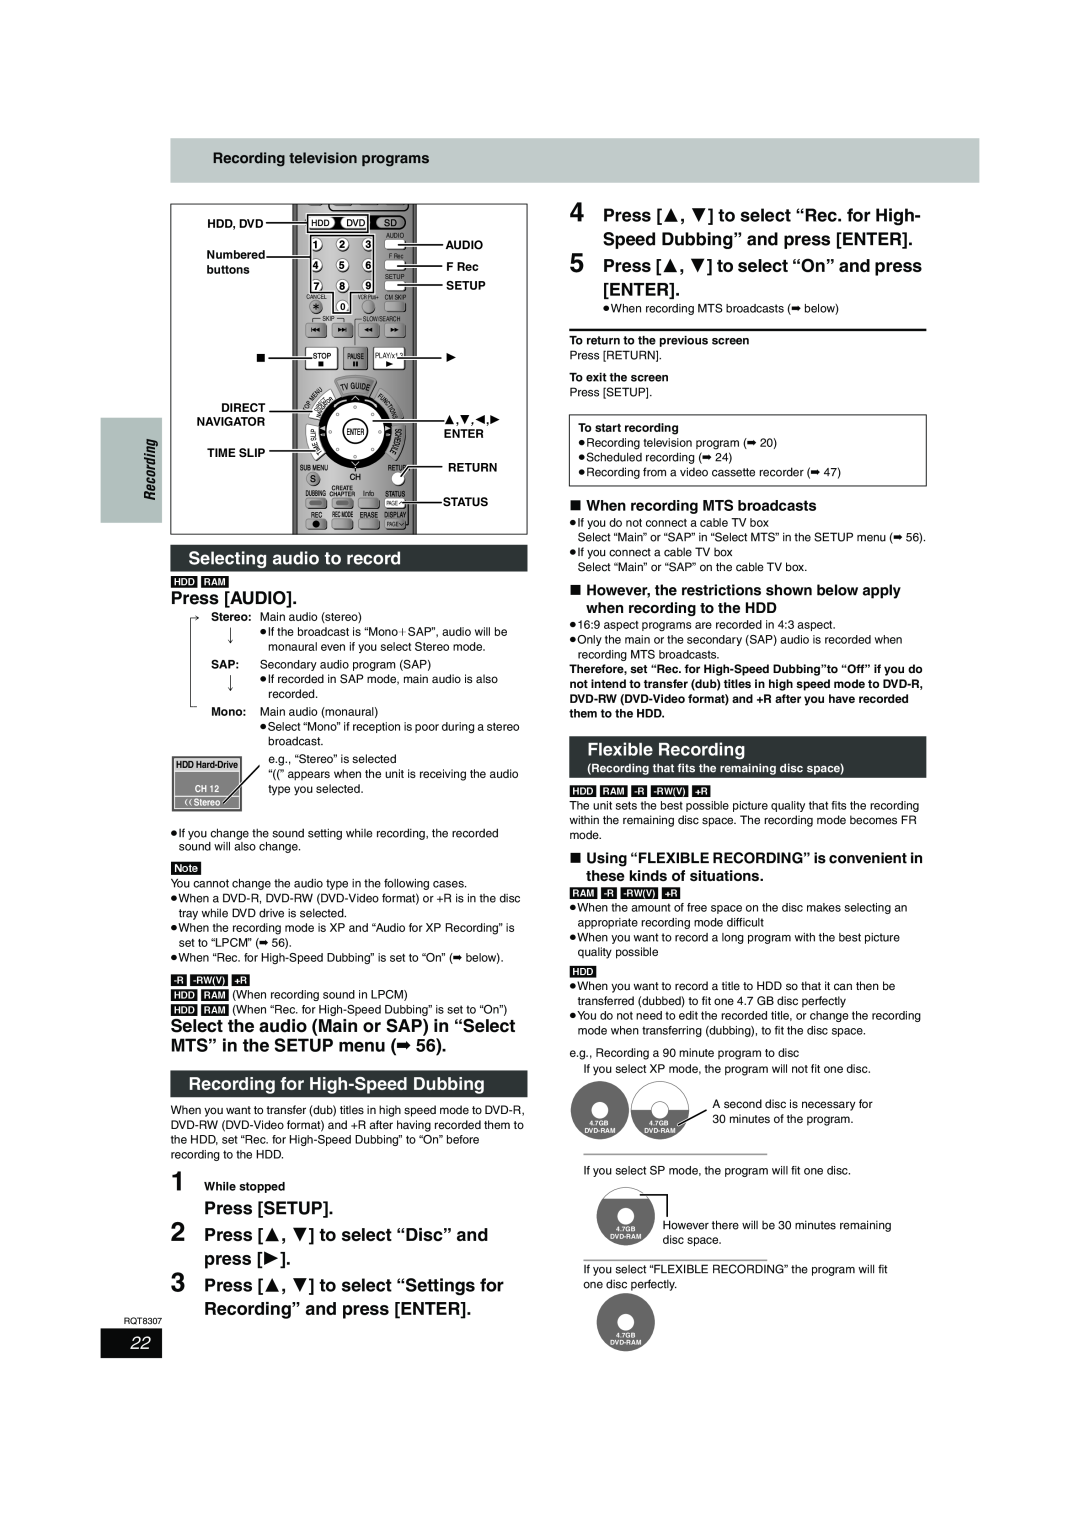 Panasonic DMR-EH60 warranty Press 3, 4 to select “Rec. for High Speed Dubbing” and press ENTER, Selecting audio to record 